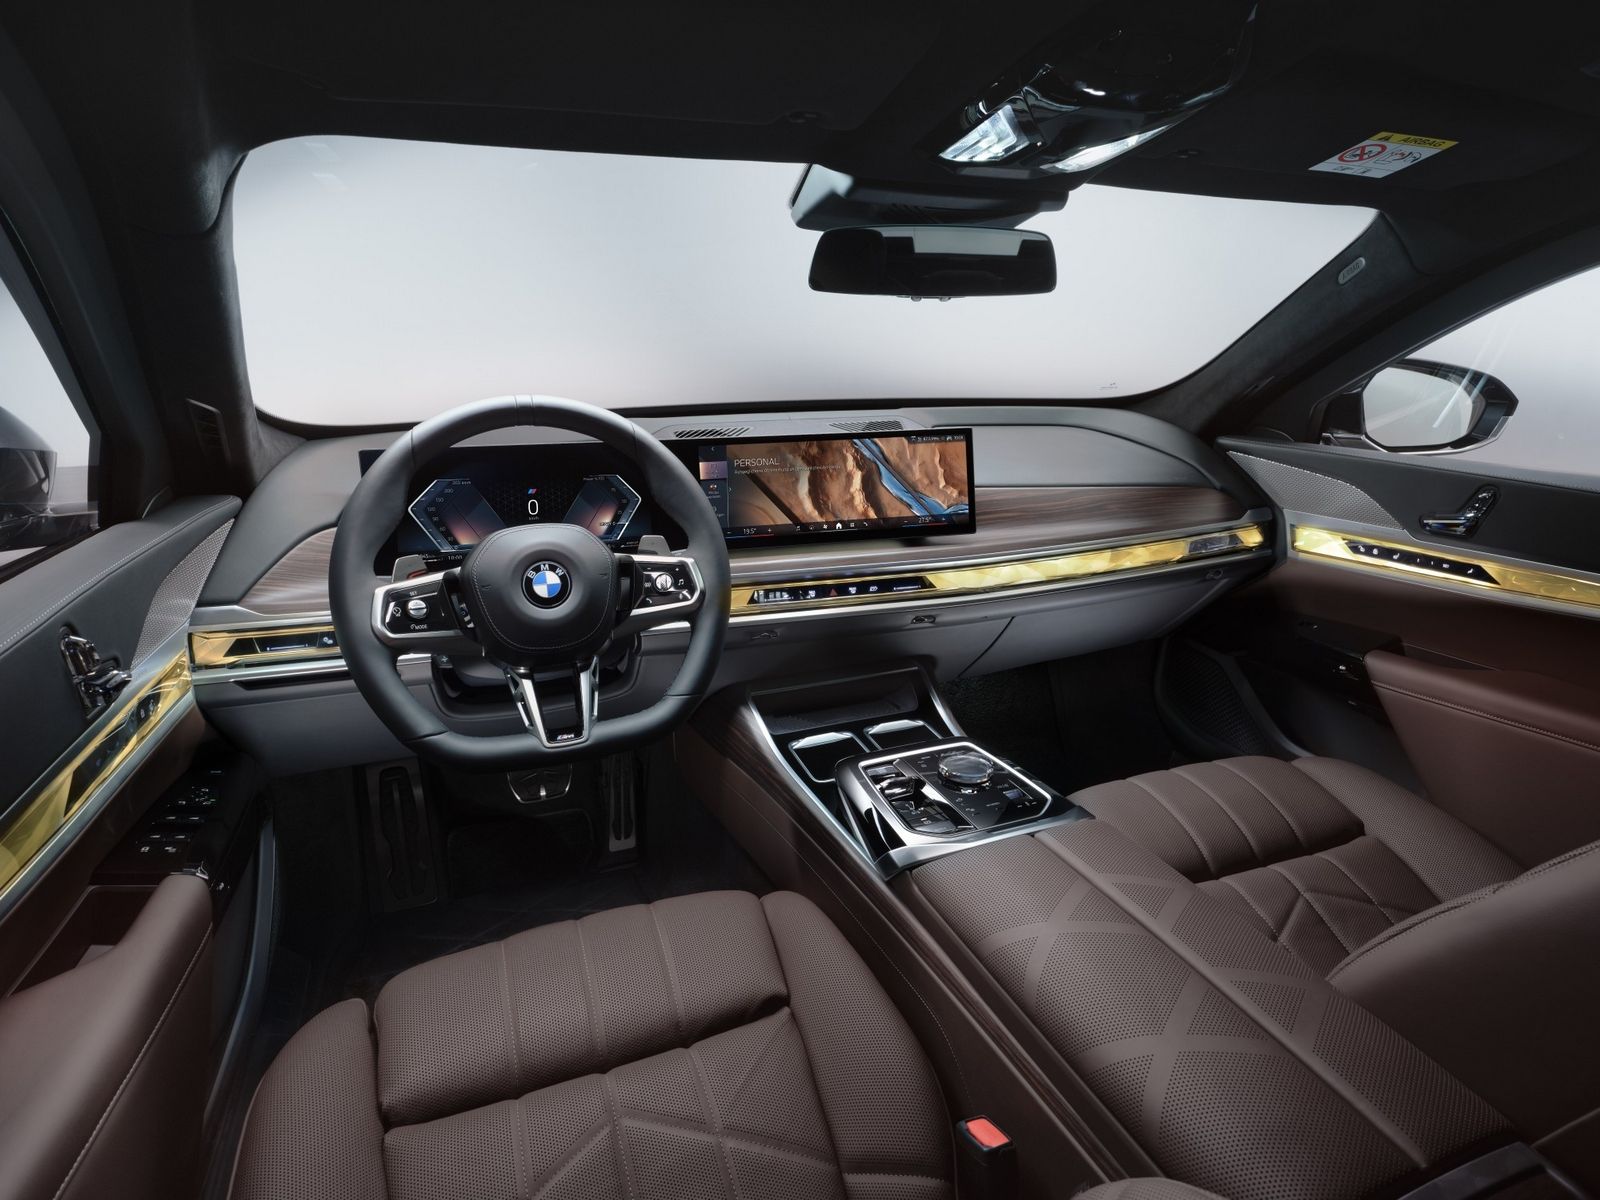 BMW's New Fragrance System Uses Roundel Badge To Produce A Pleasant Smell